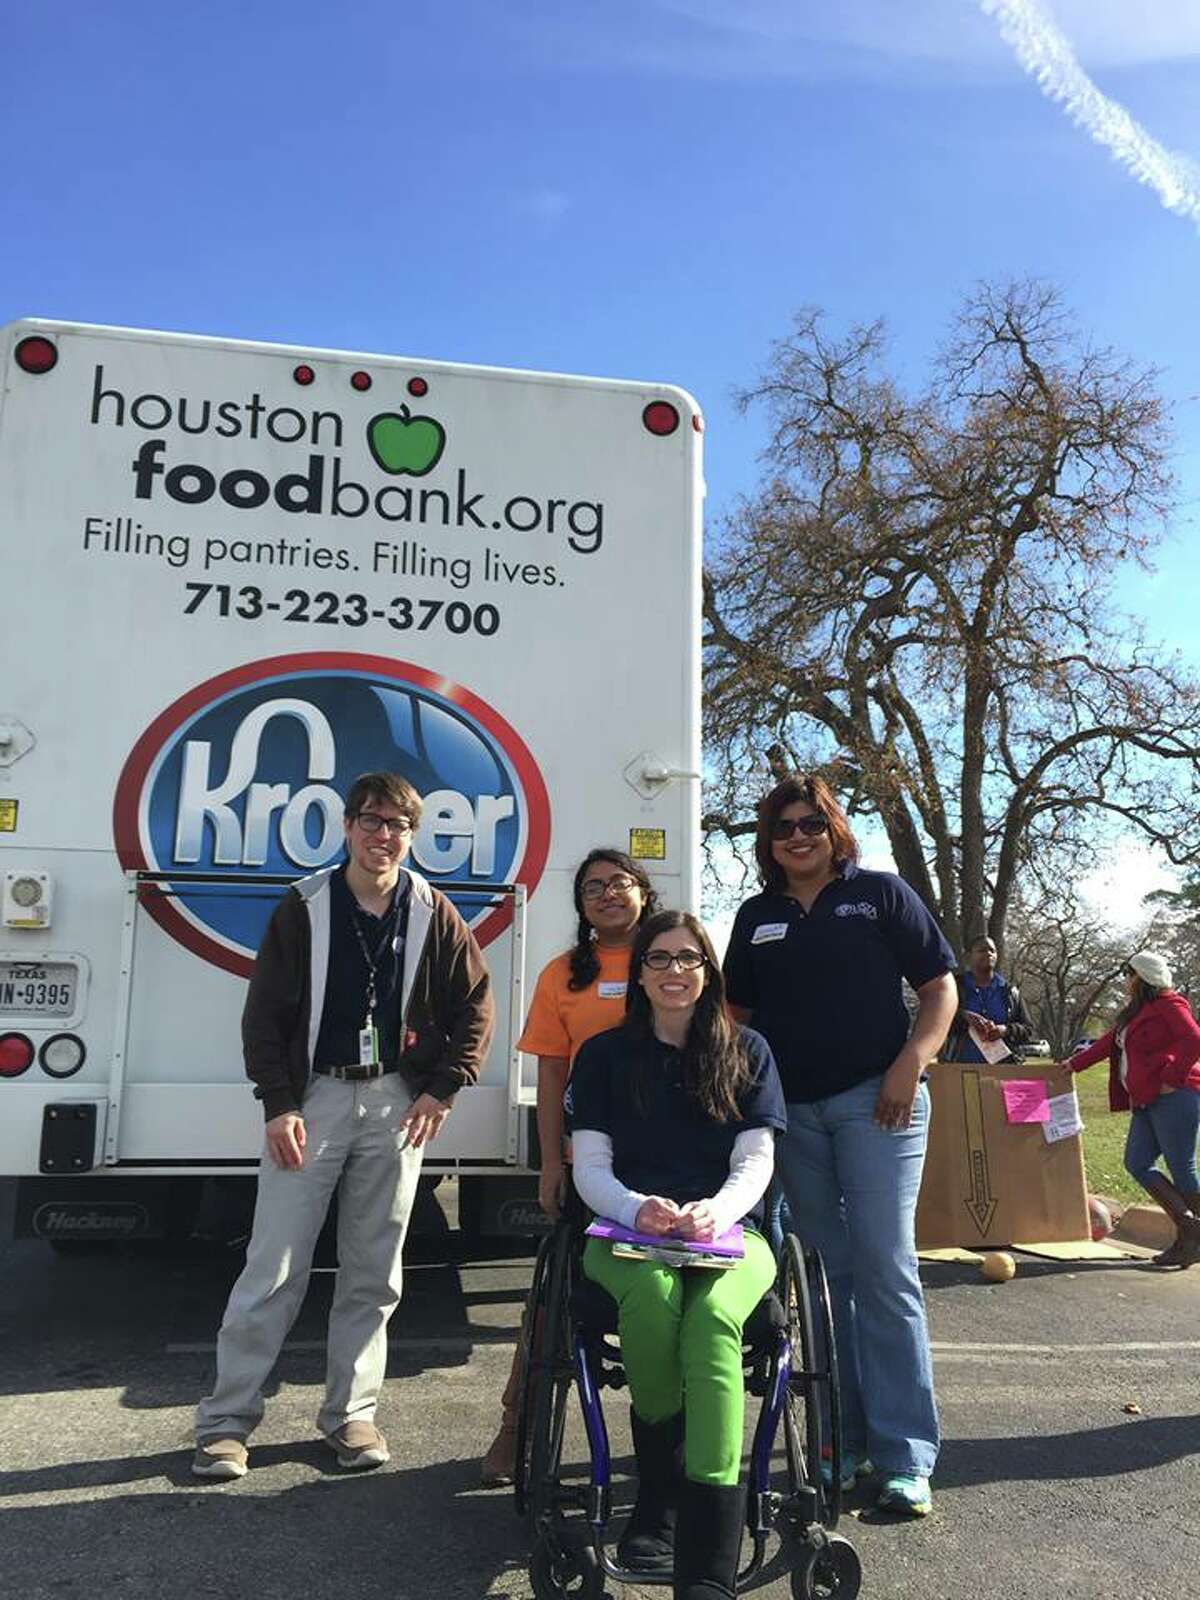 Spencer Brown, left, spent the past year working at the Houston Food Bank through the Americorps VISTA program.